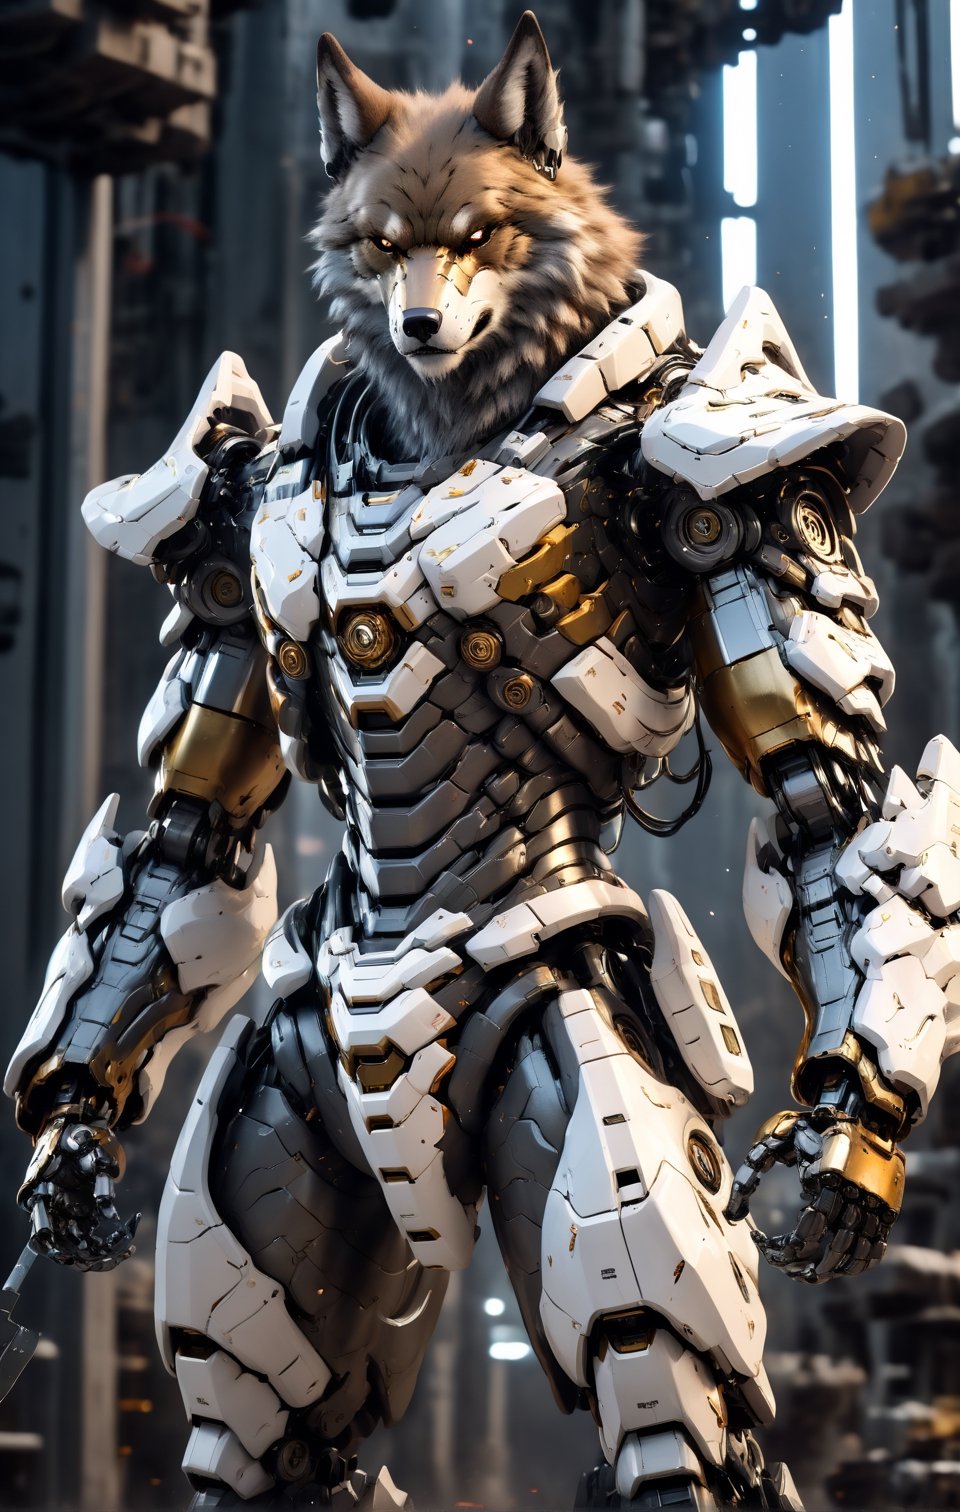 An Angry brown Wolf Robot Mecha Soldier, Angry Agile Anthropomorphic Figure, Wearing Futuristic White and Gray Soldier Armor and Weapons, Reflection Mapping, Realistic Figure, Hyper Detailed, Cinematic Lighting Photography, 32k UHD